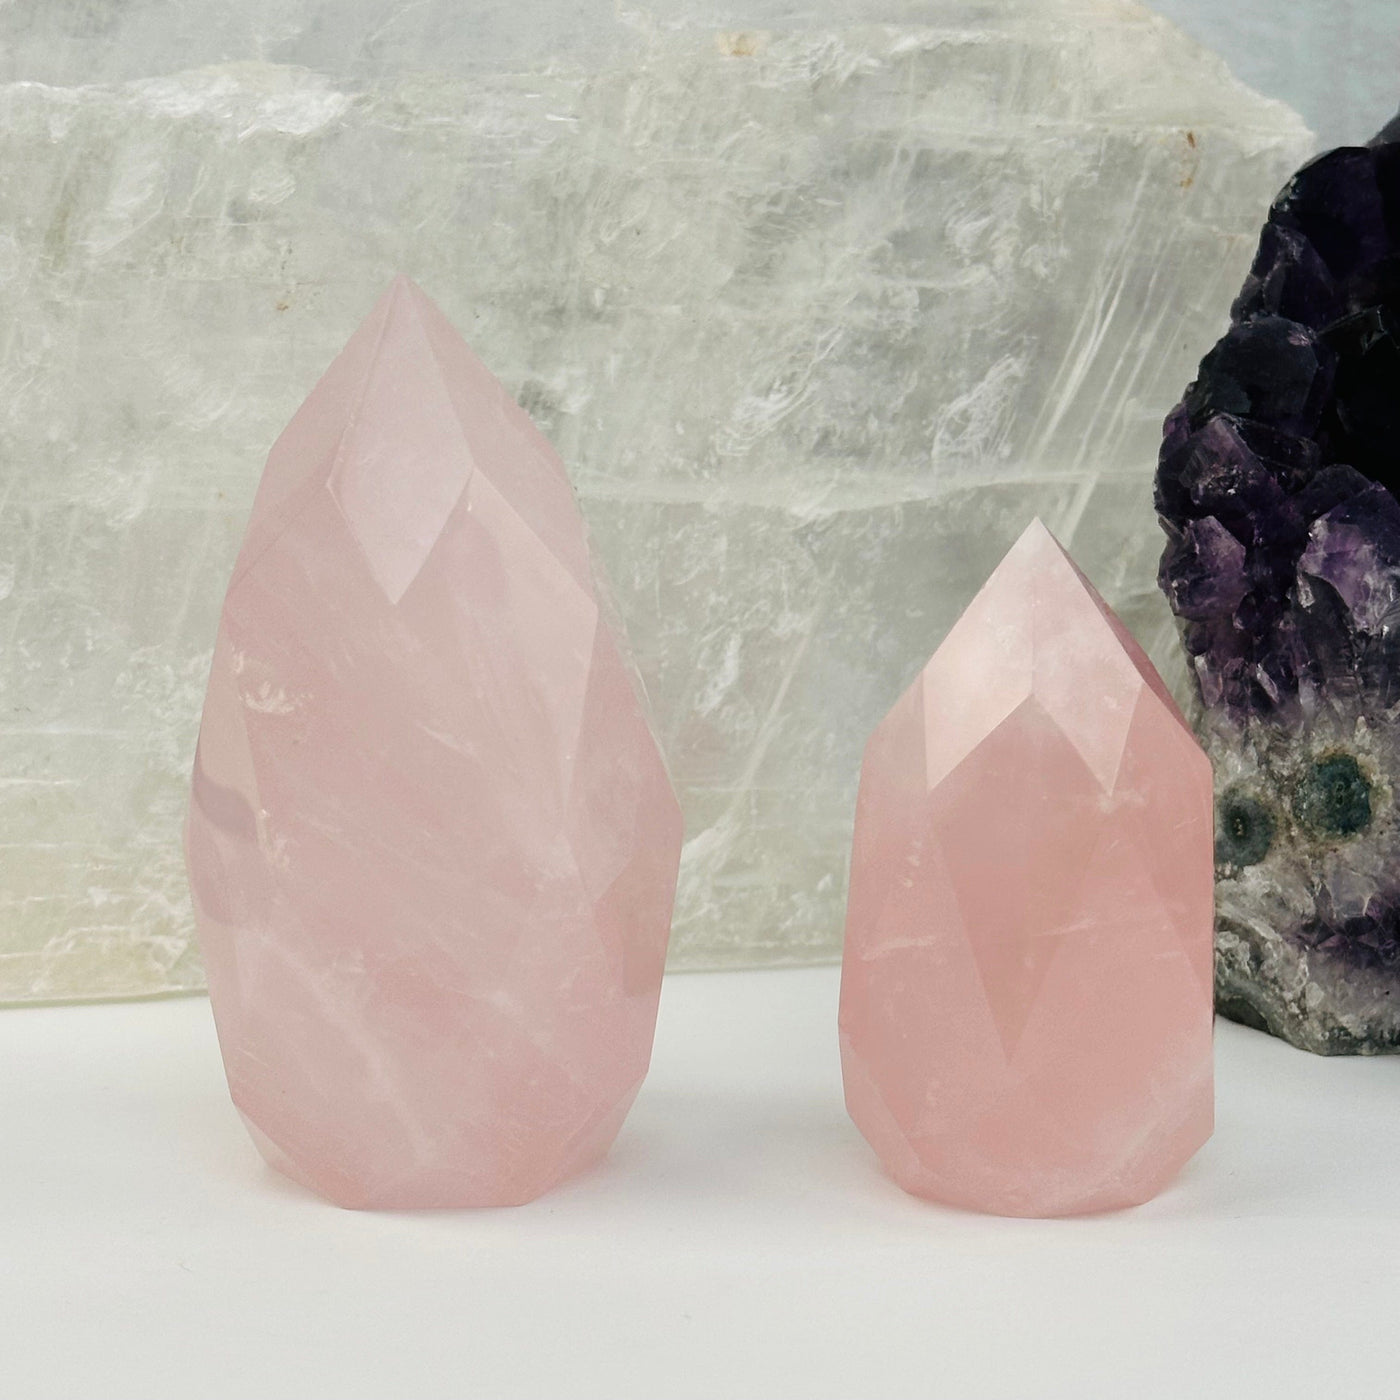 Faceted Rose Quartz Crystal Egg Point displayed as home decor